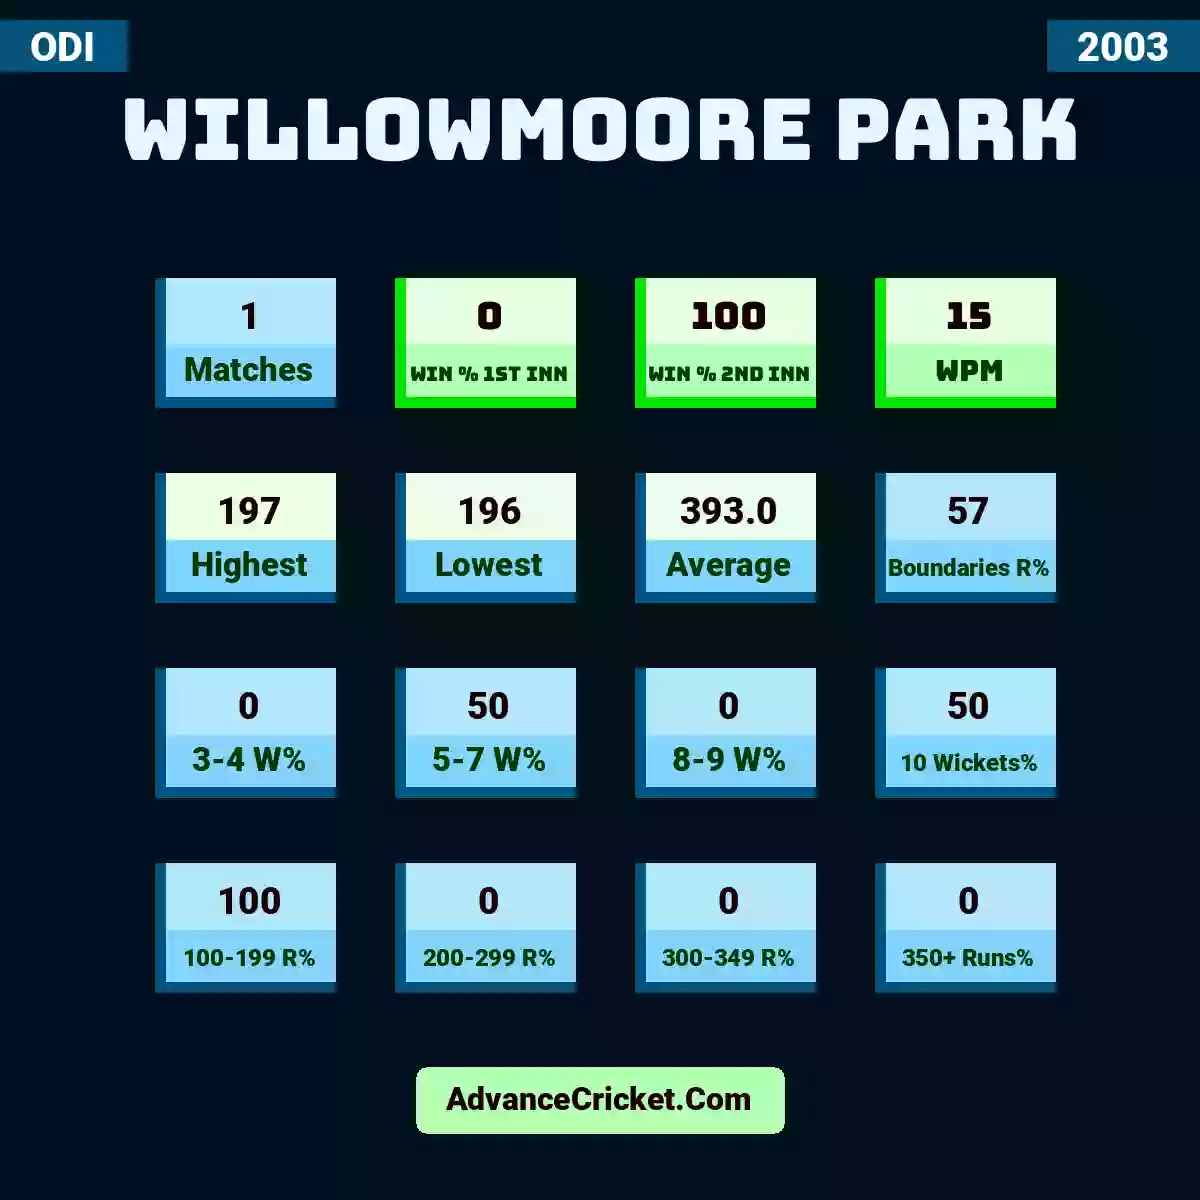 Image showing Willowmoore Park with Matches: 1, Win % 1st Inn: 0, Win % 2nd Inn: 100, WPM: 15, Highest: 197, Lowest: 196, Average: 393.0, Boundaries R%: 57, 3-4 W%: 0, 5-7 W%: 50, 8-9 W%: 0, 10 Wickets%: 50, 100-199 R%: 100, 200-299 R%: 0, 300-349 R%: 0, 350+ Runs%: 0.